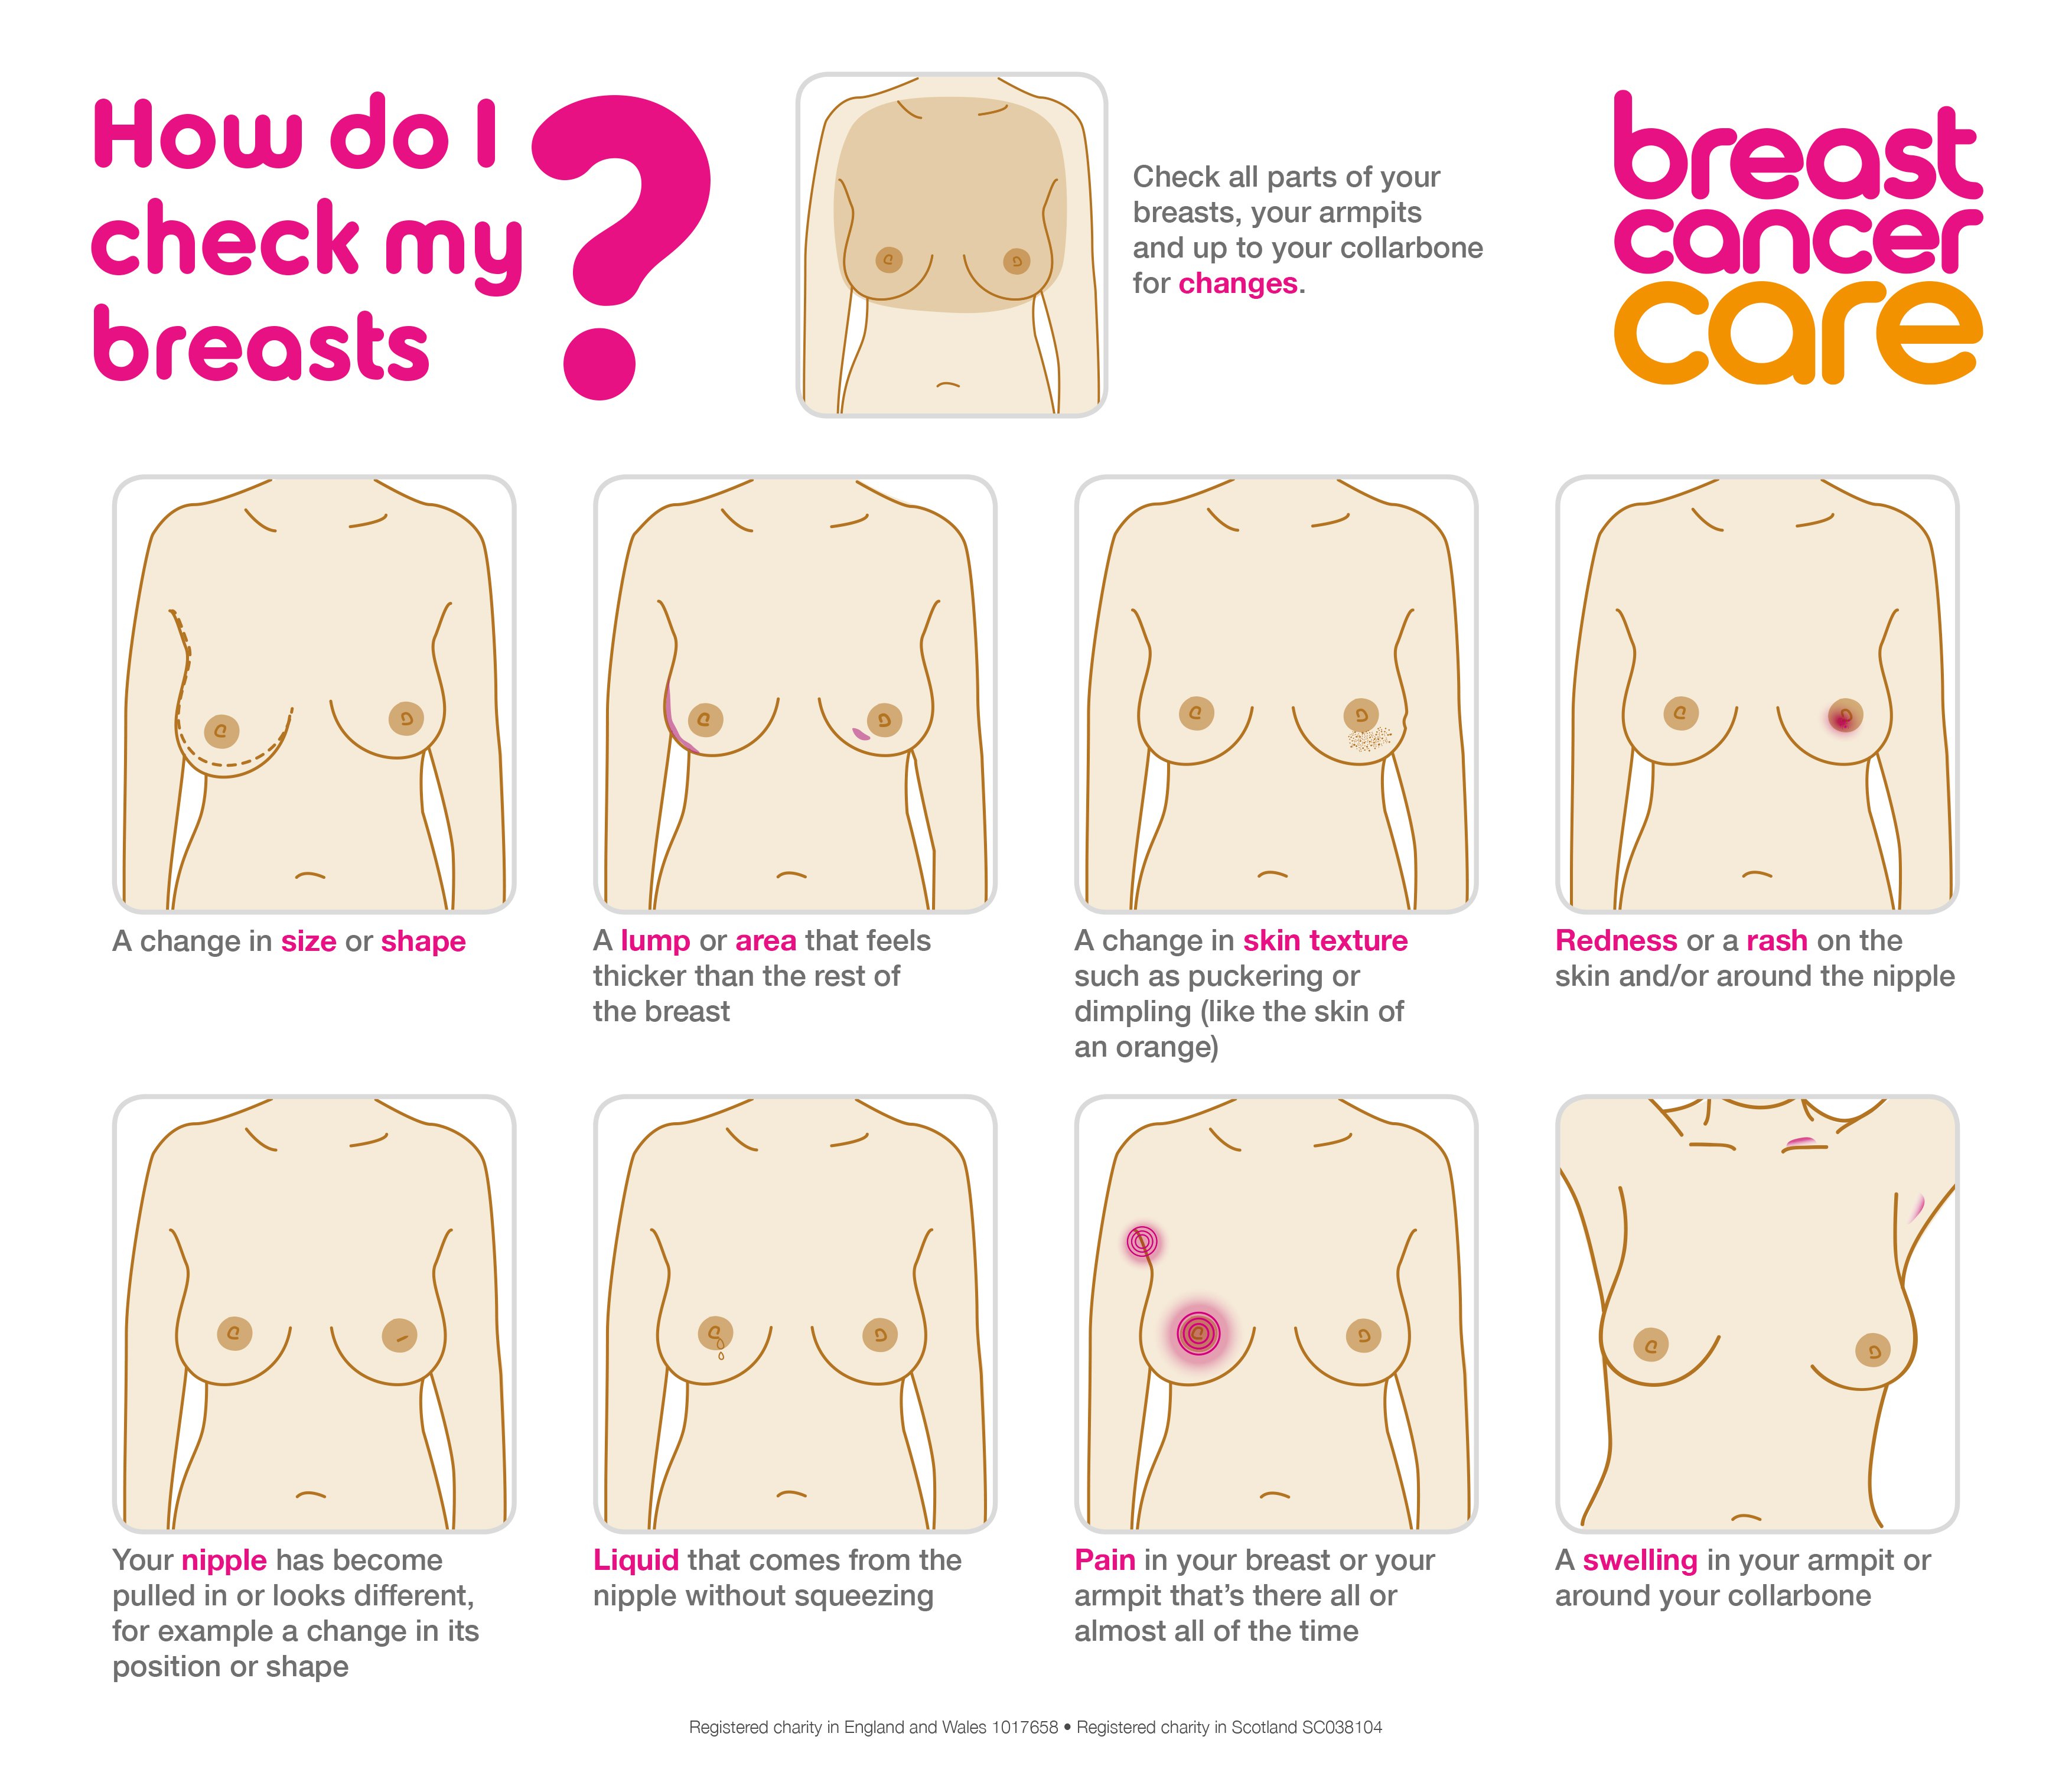 Breast Cancer Now on X: Get to know what's 'normal' for you. Give